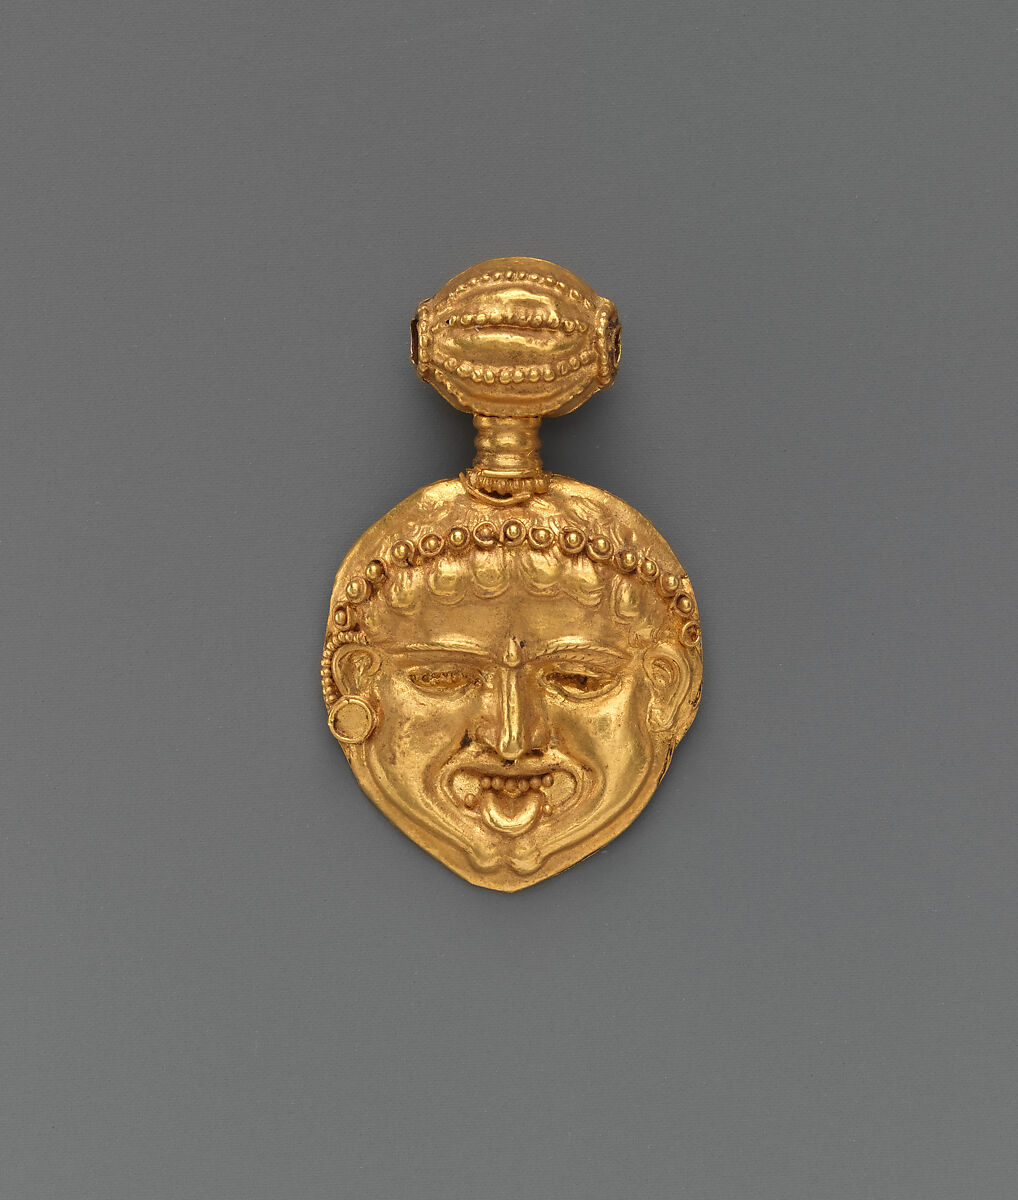 Gold pendant in the form of a gorgoneion (Gorgon's face)